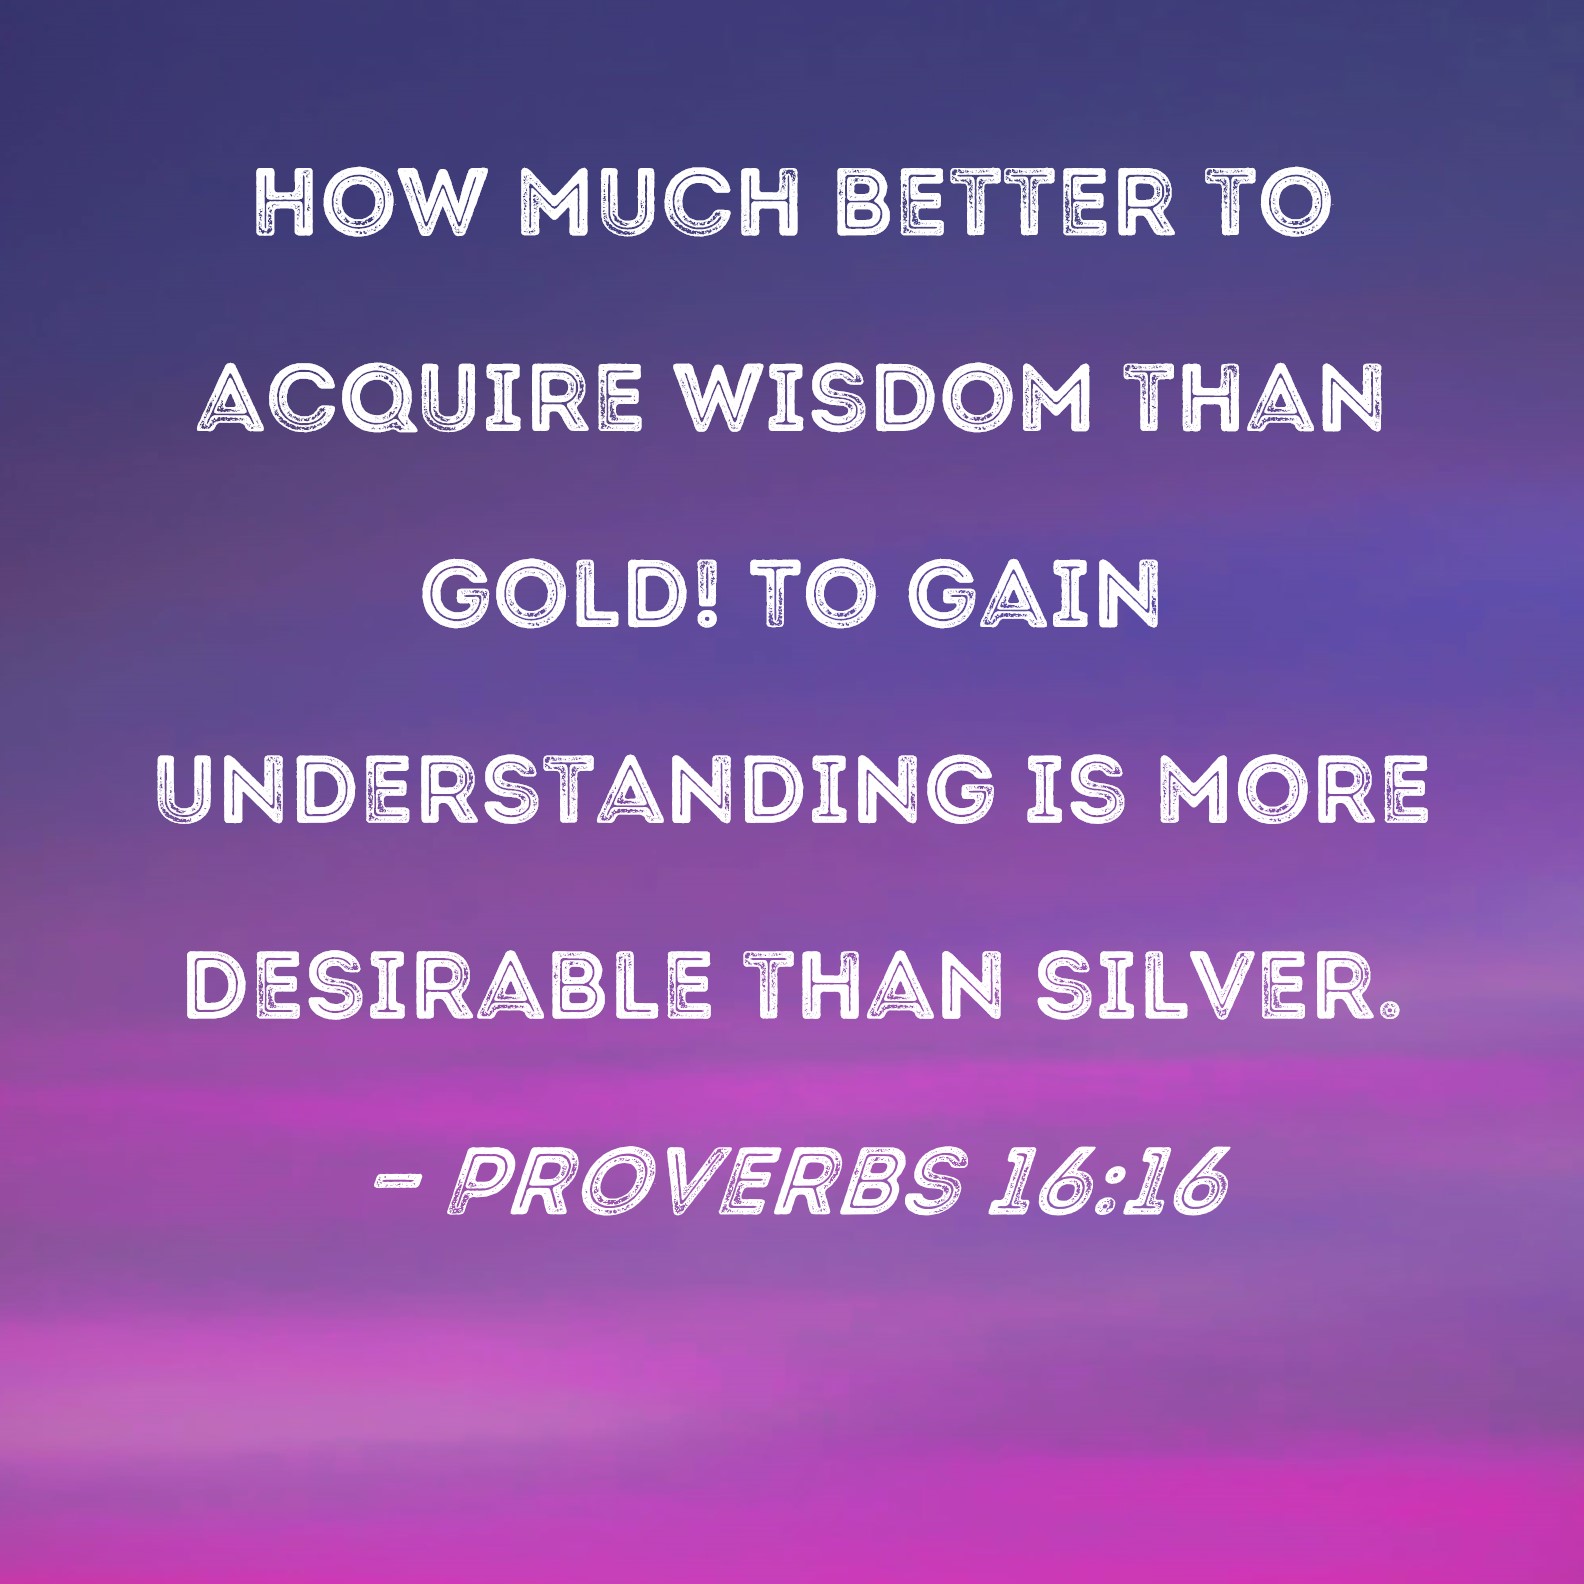 Proverbs 16:16 How much better to acquire wisdom than gold! To gain  understanding is more desirable than silver.